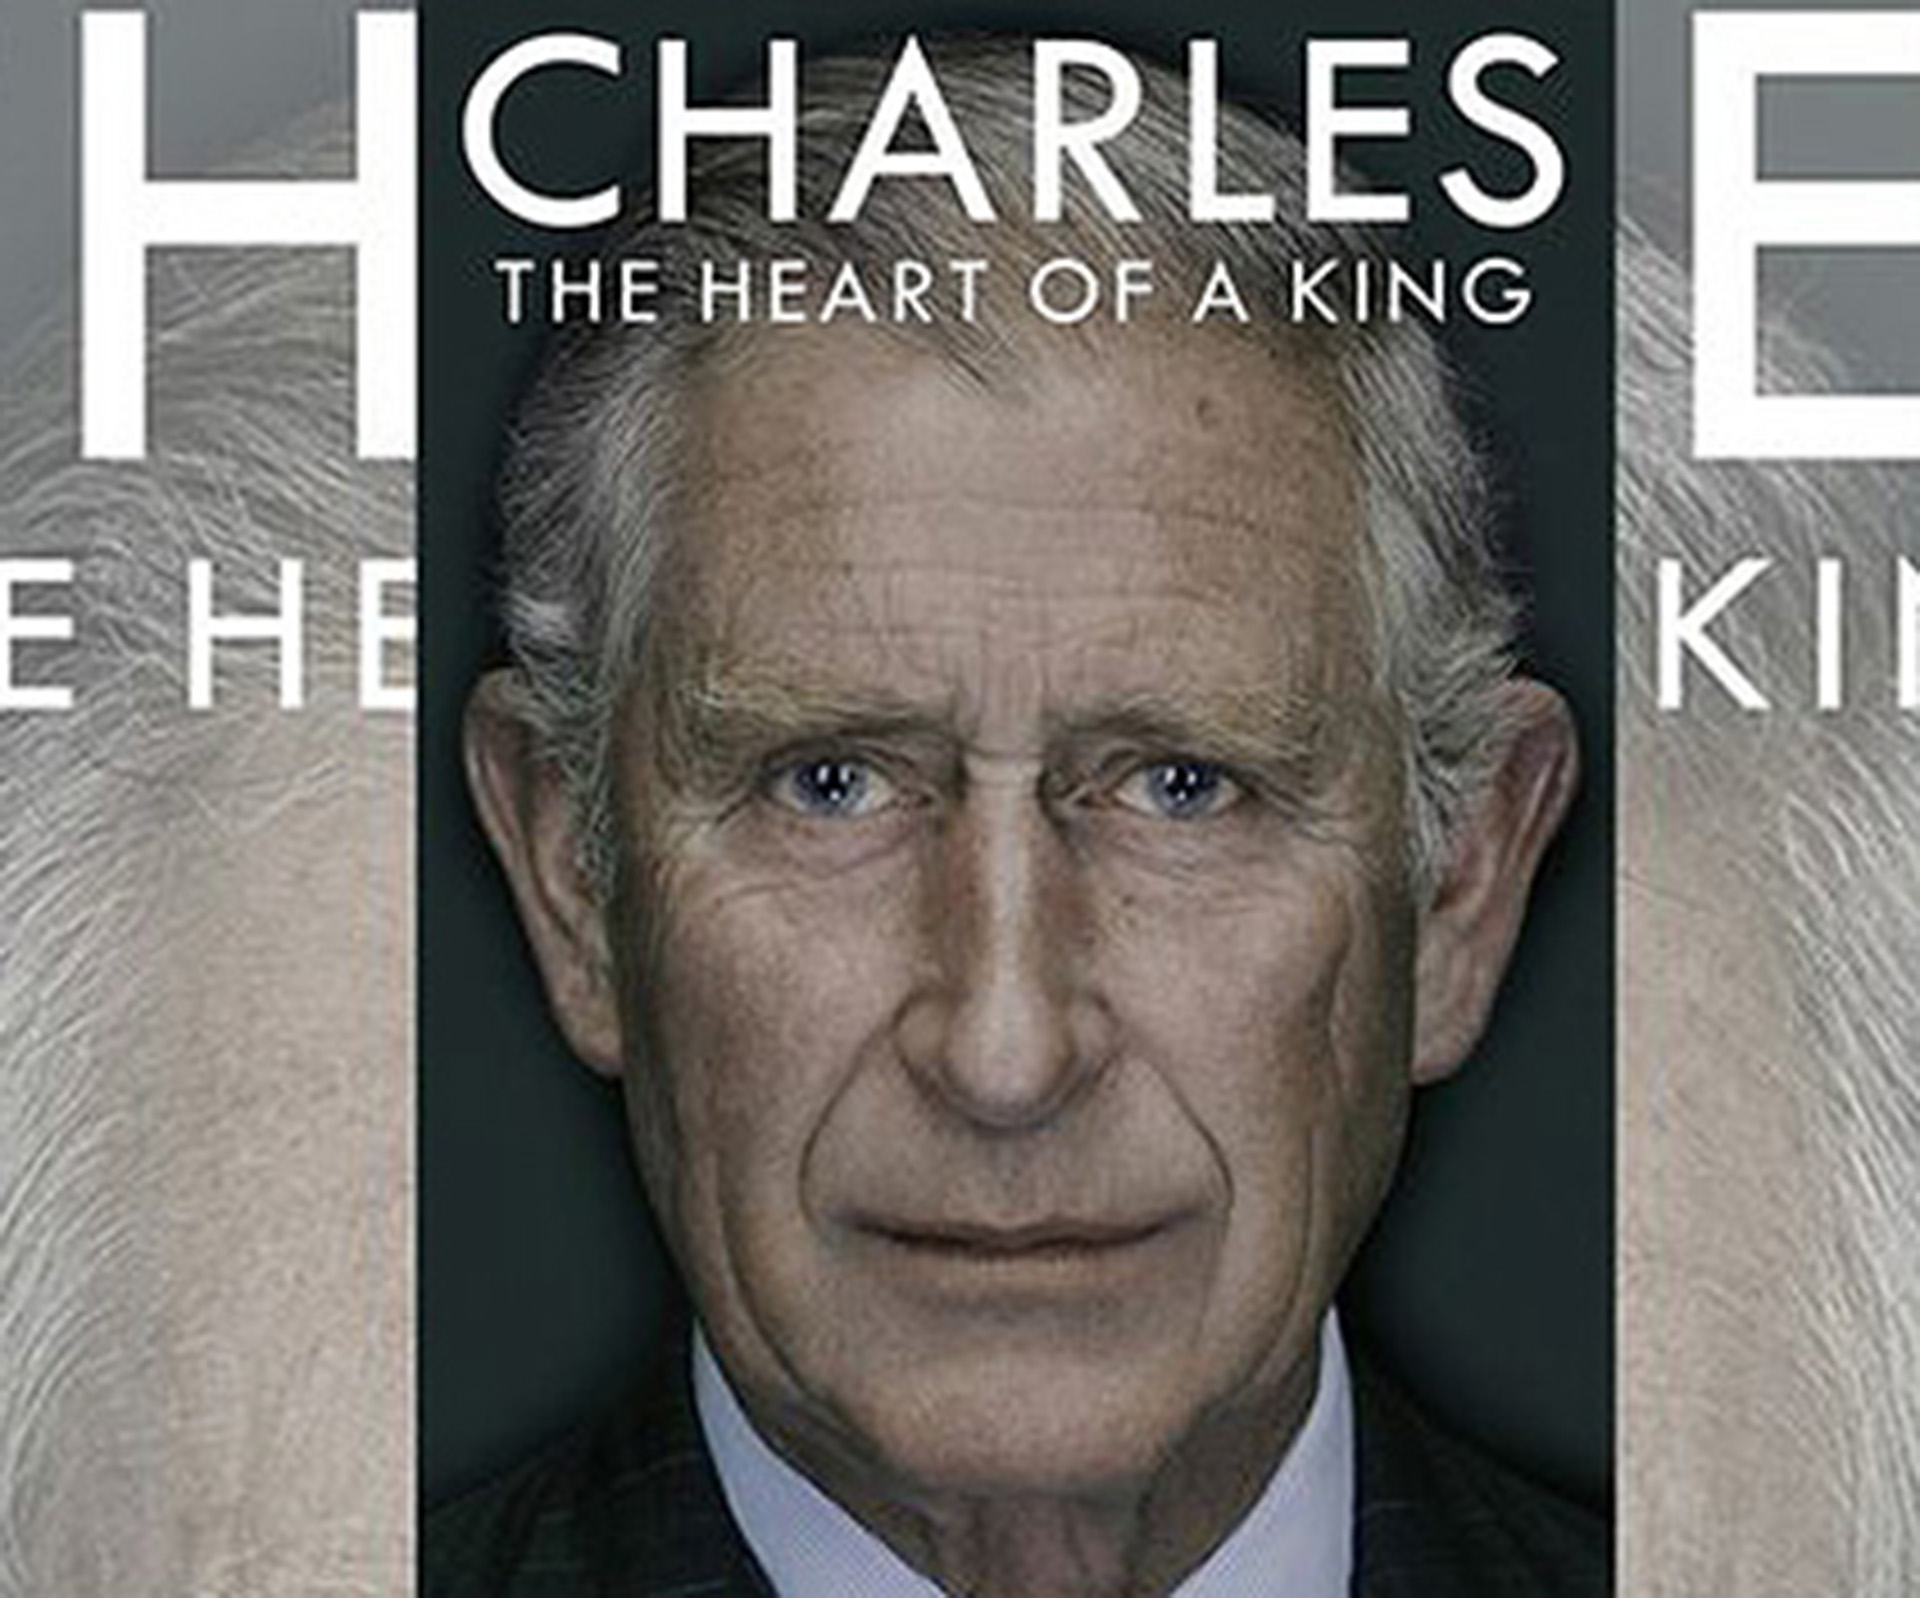 Prince Charles biography Heart of a King